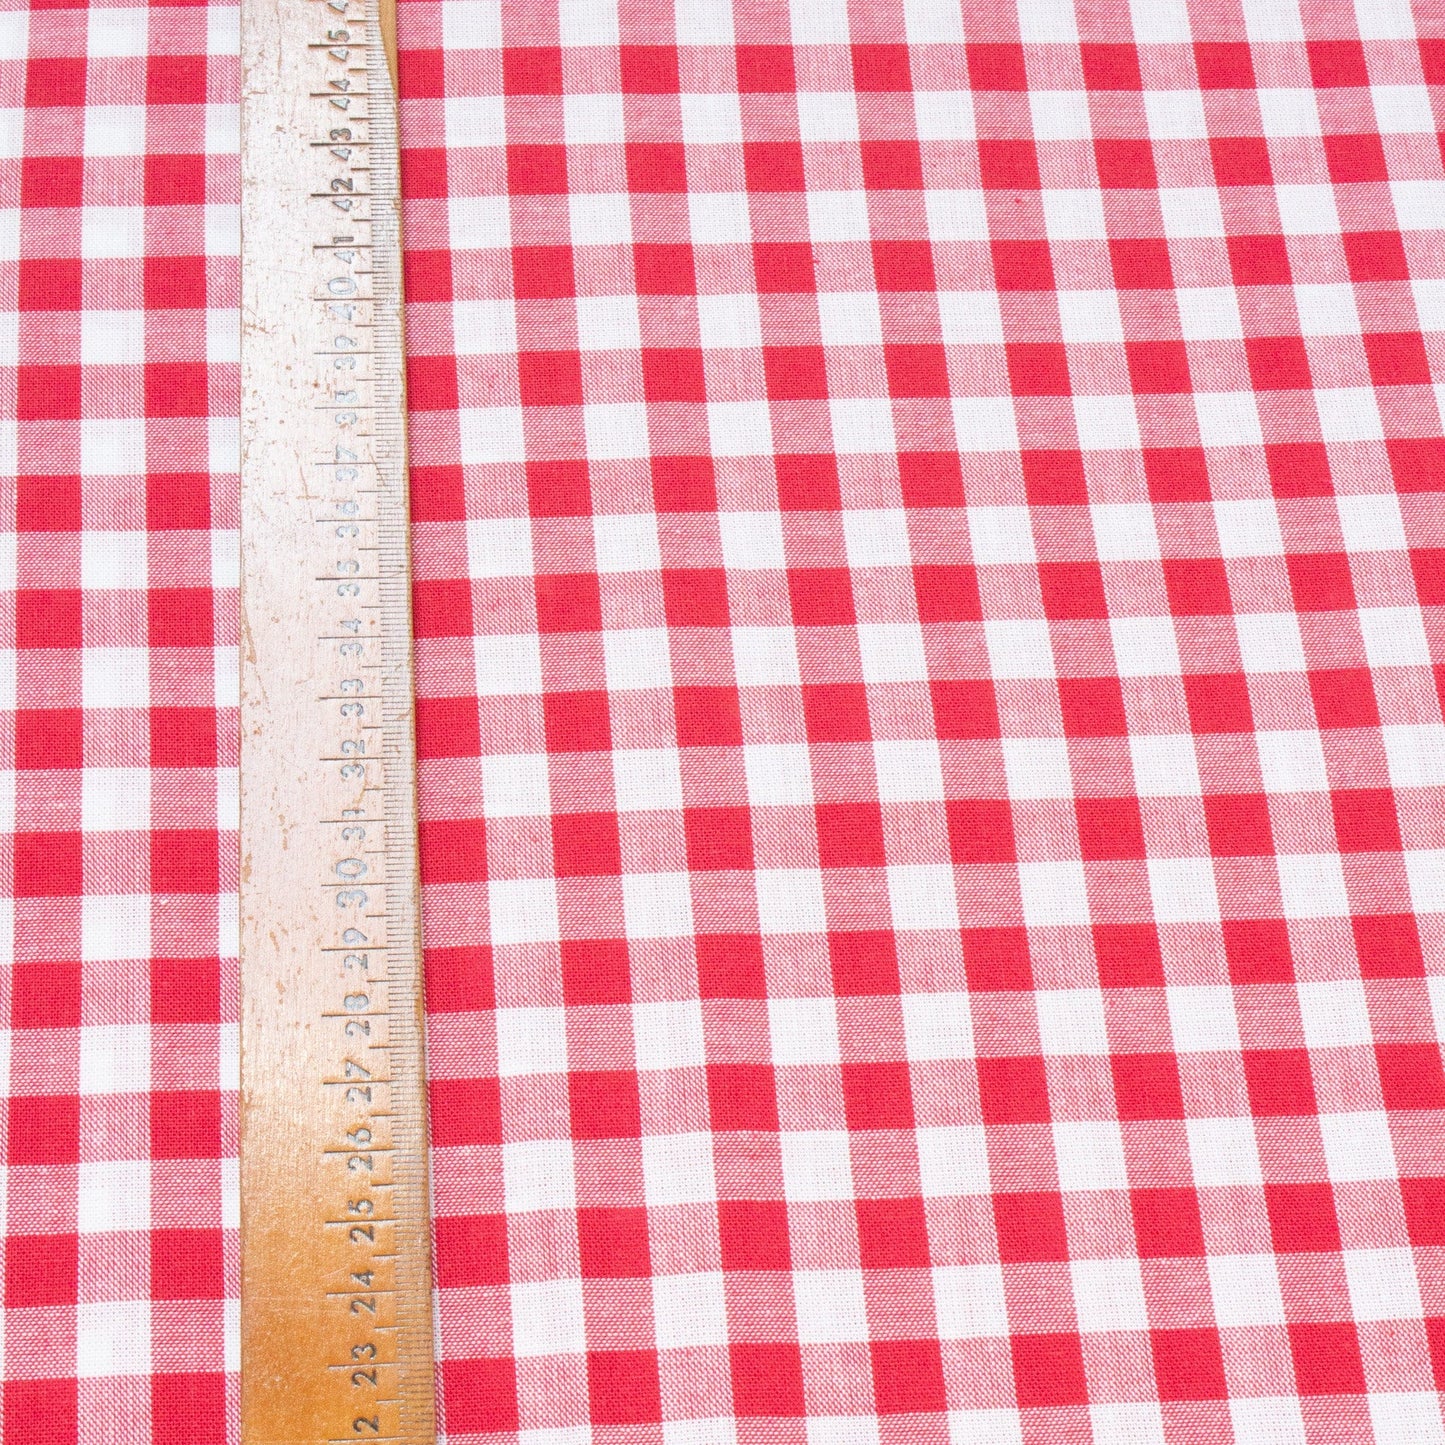 Cotton Gingham in Red and White 1 cm Check